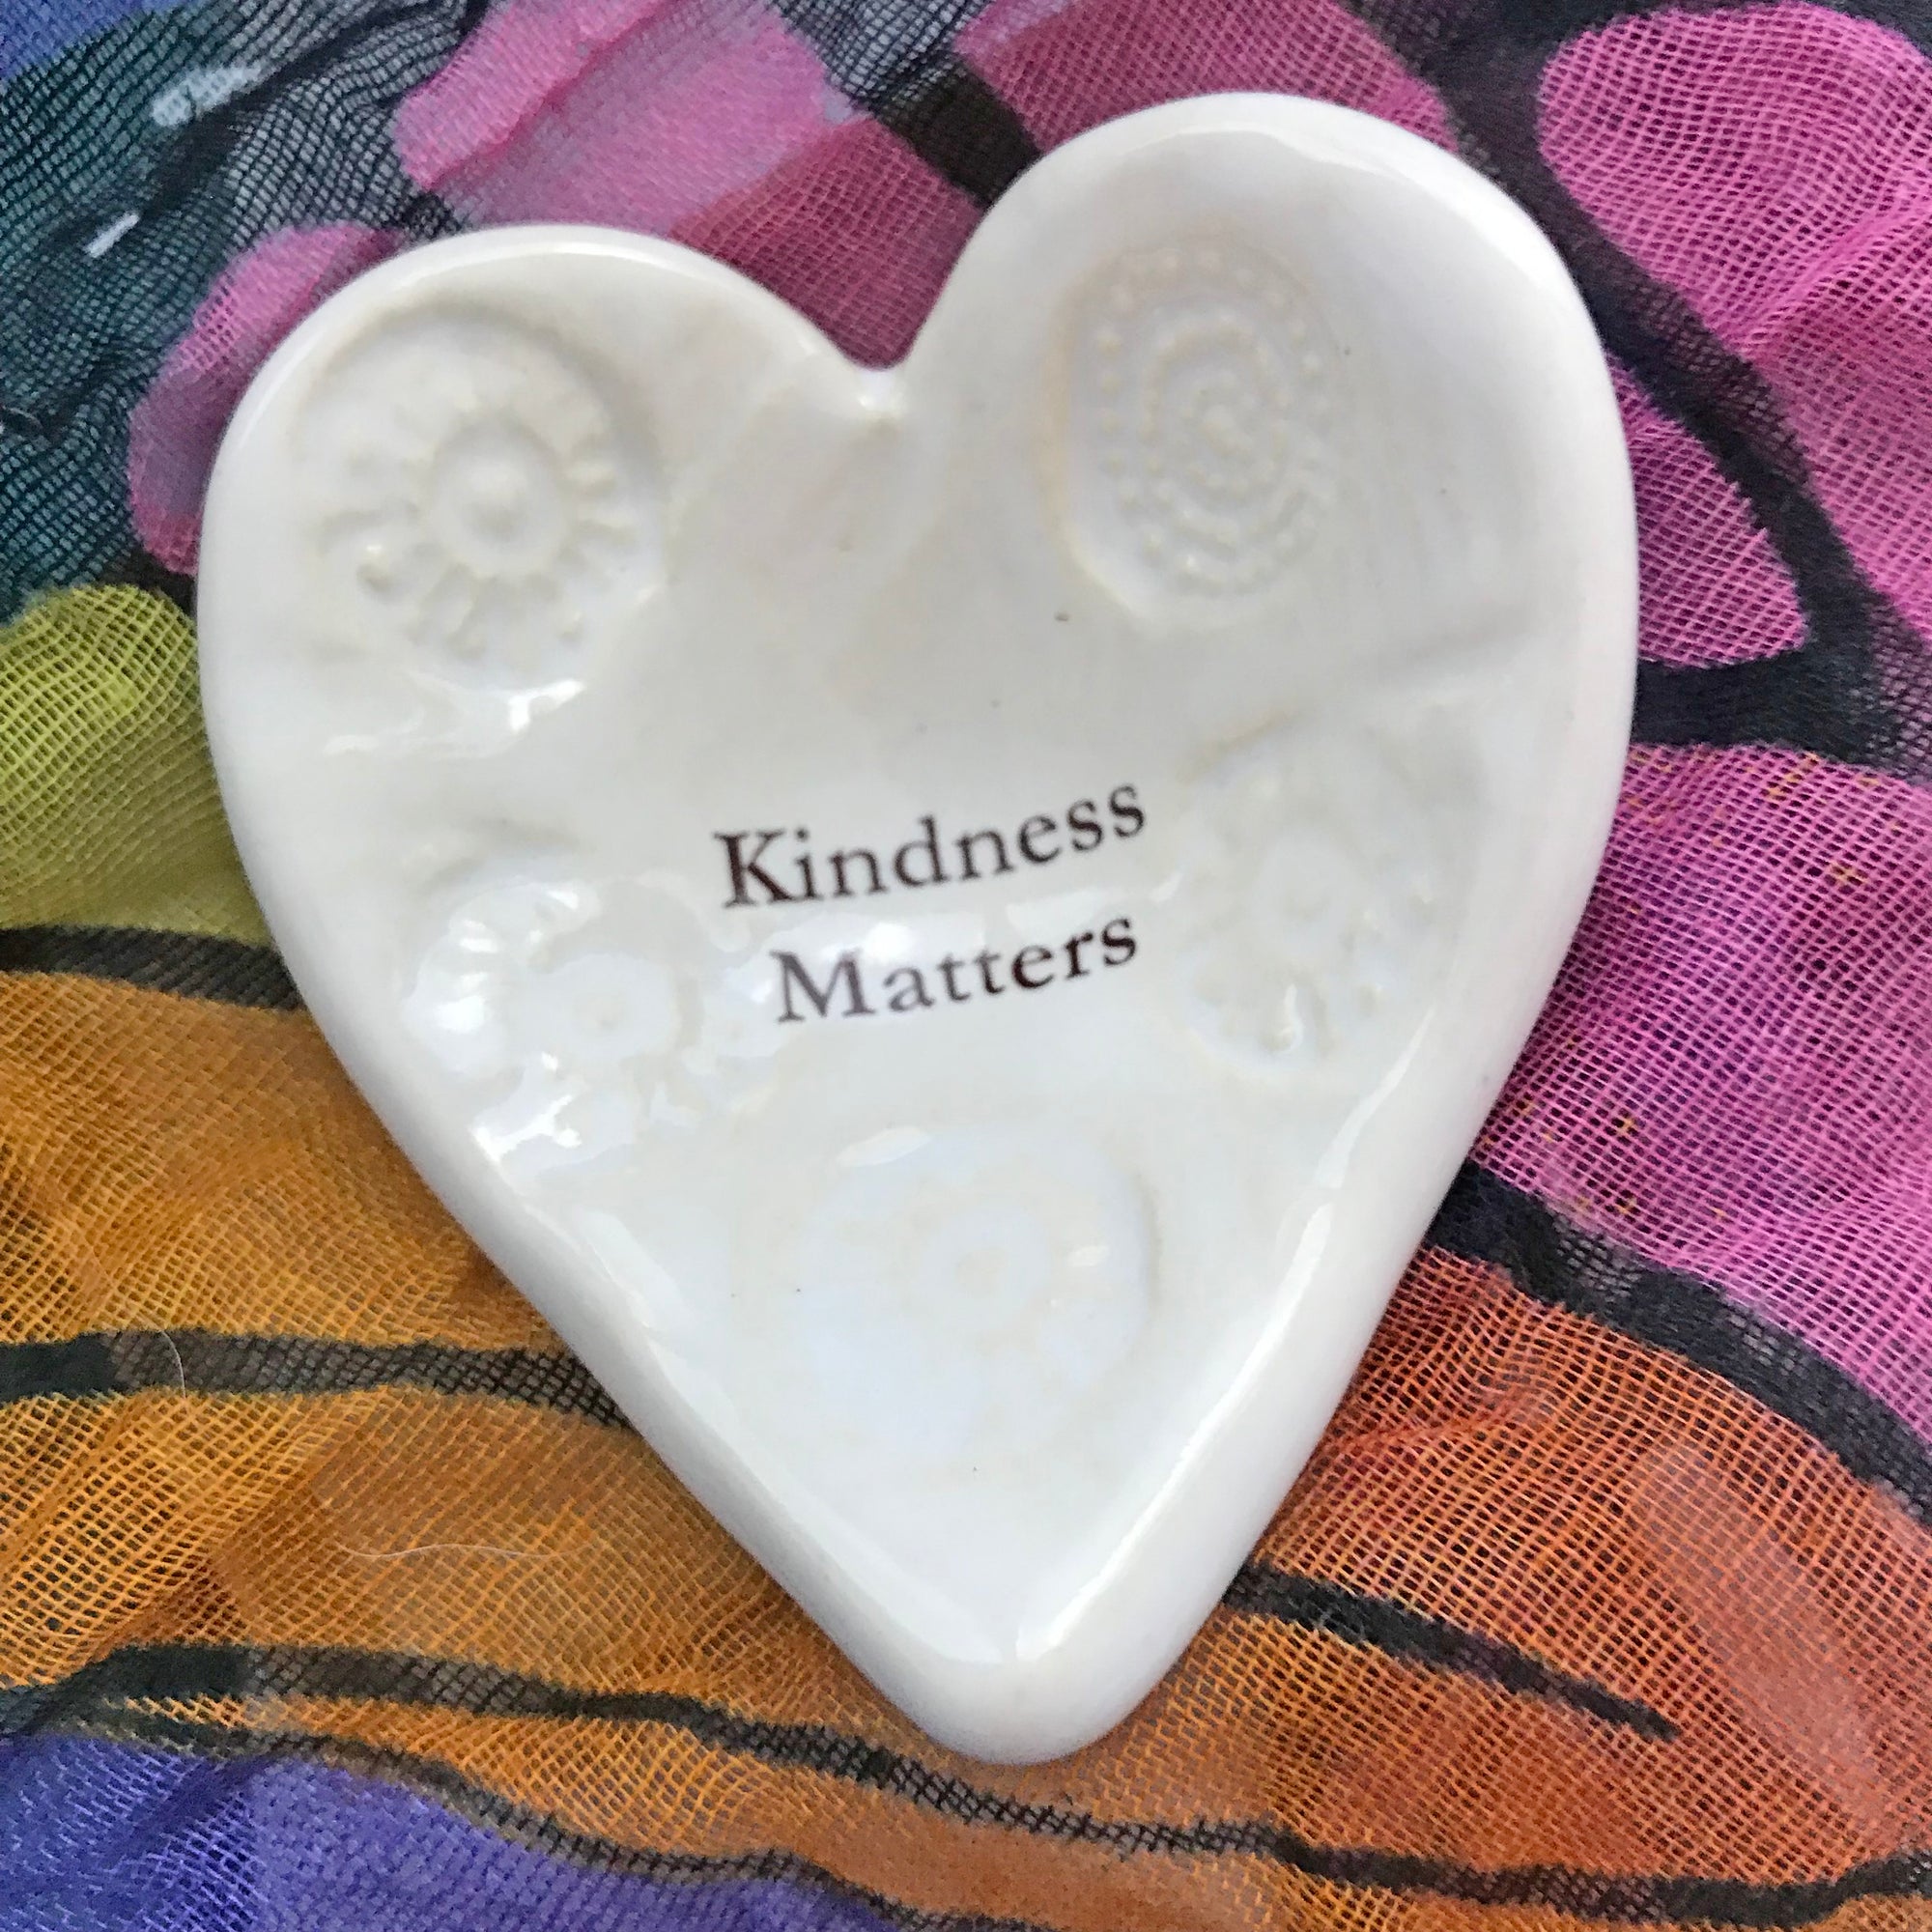 "Kindness Matters" inscribed on a Giving Heart is a perfect gift to someone who has been supportive  and considerate of others. 